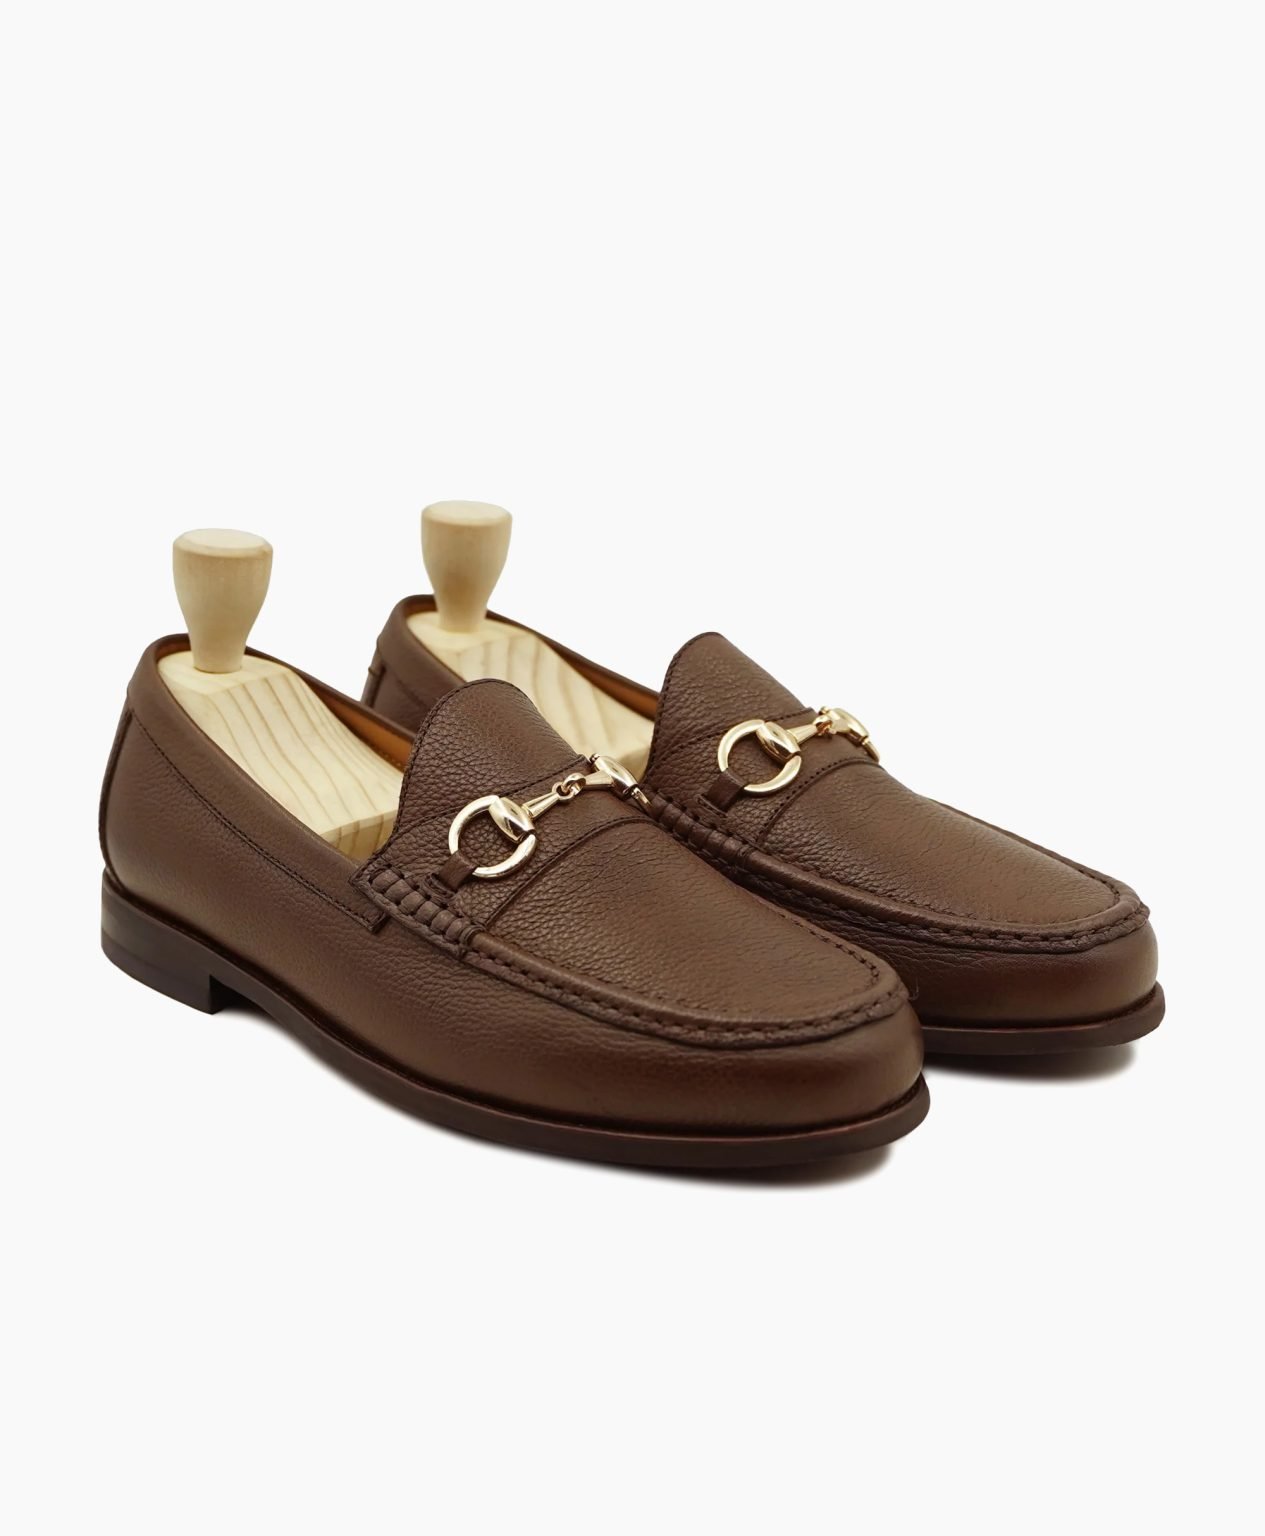 barnstaple-brown-leather-loafers-image200